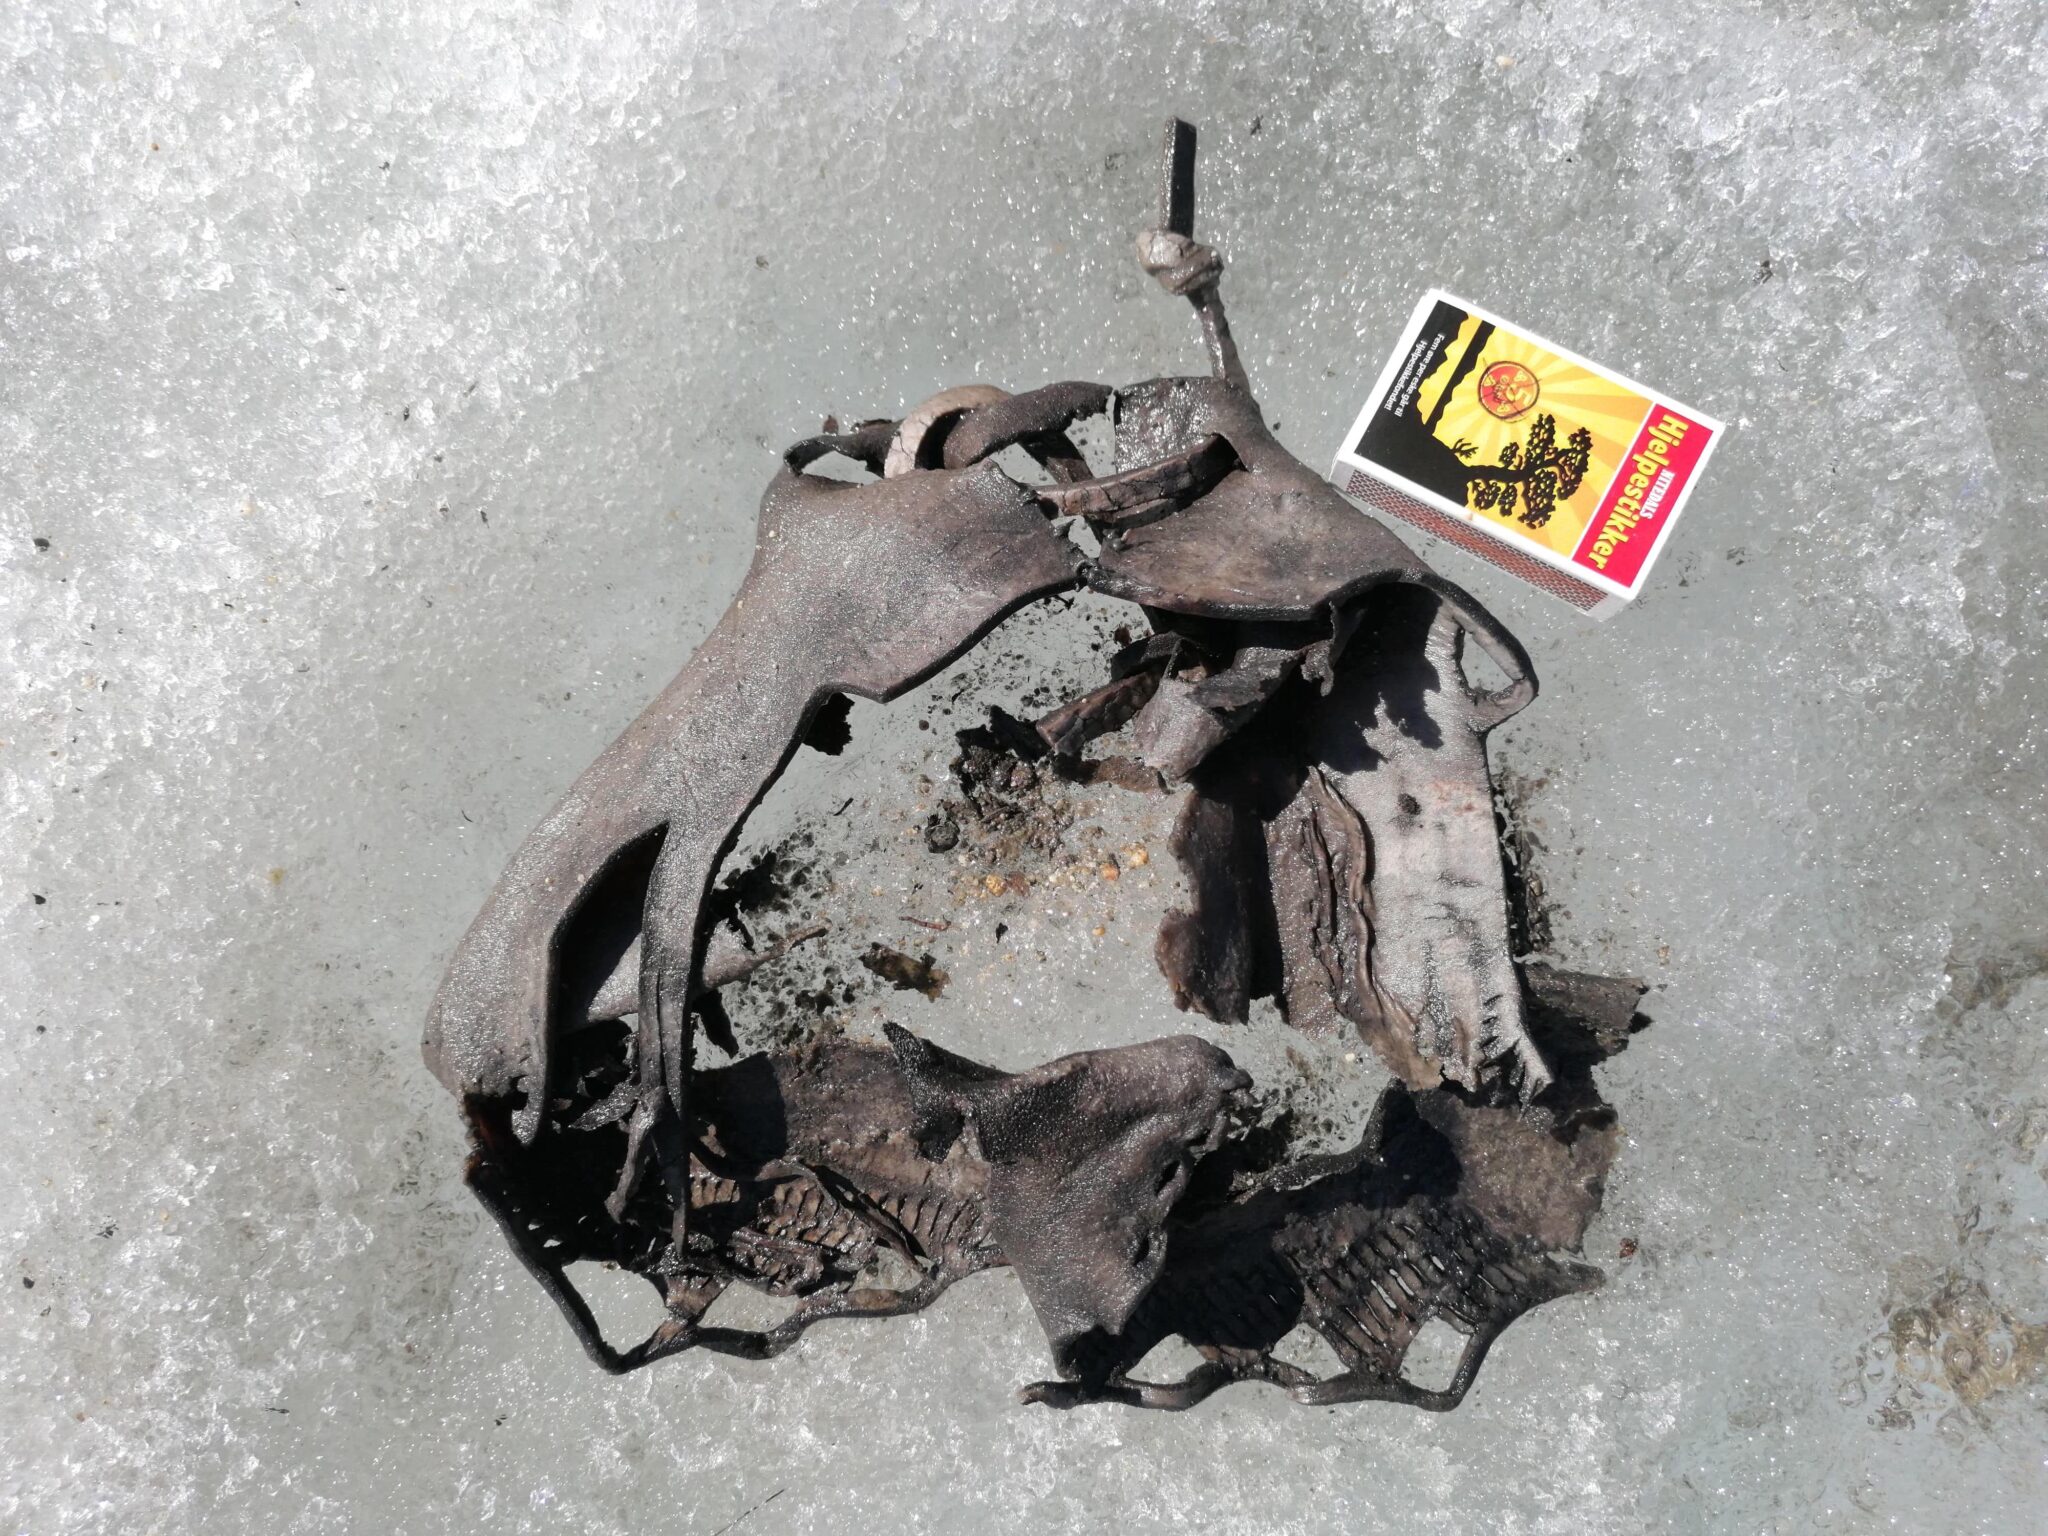 Iron Age sandal found in melting ice patch